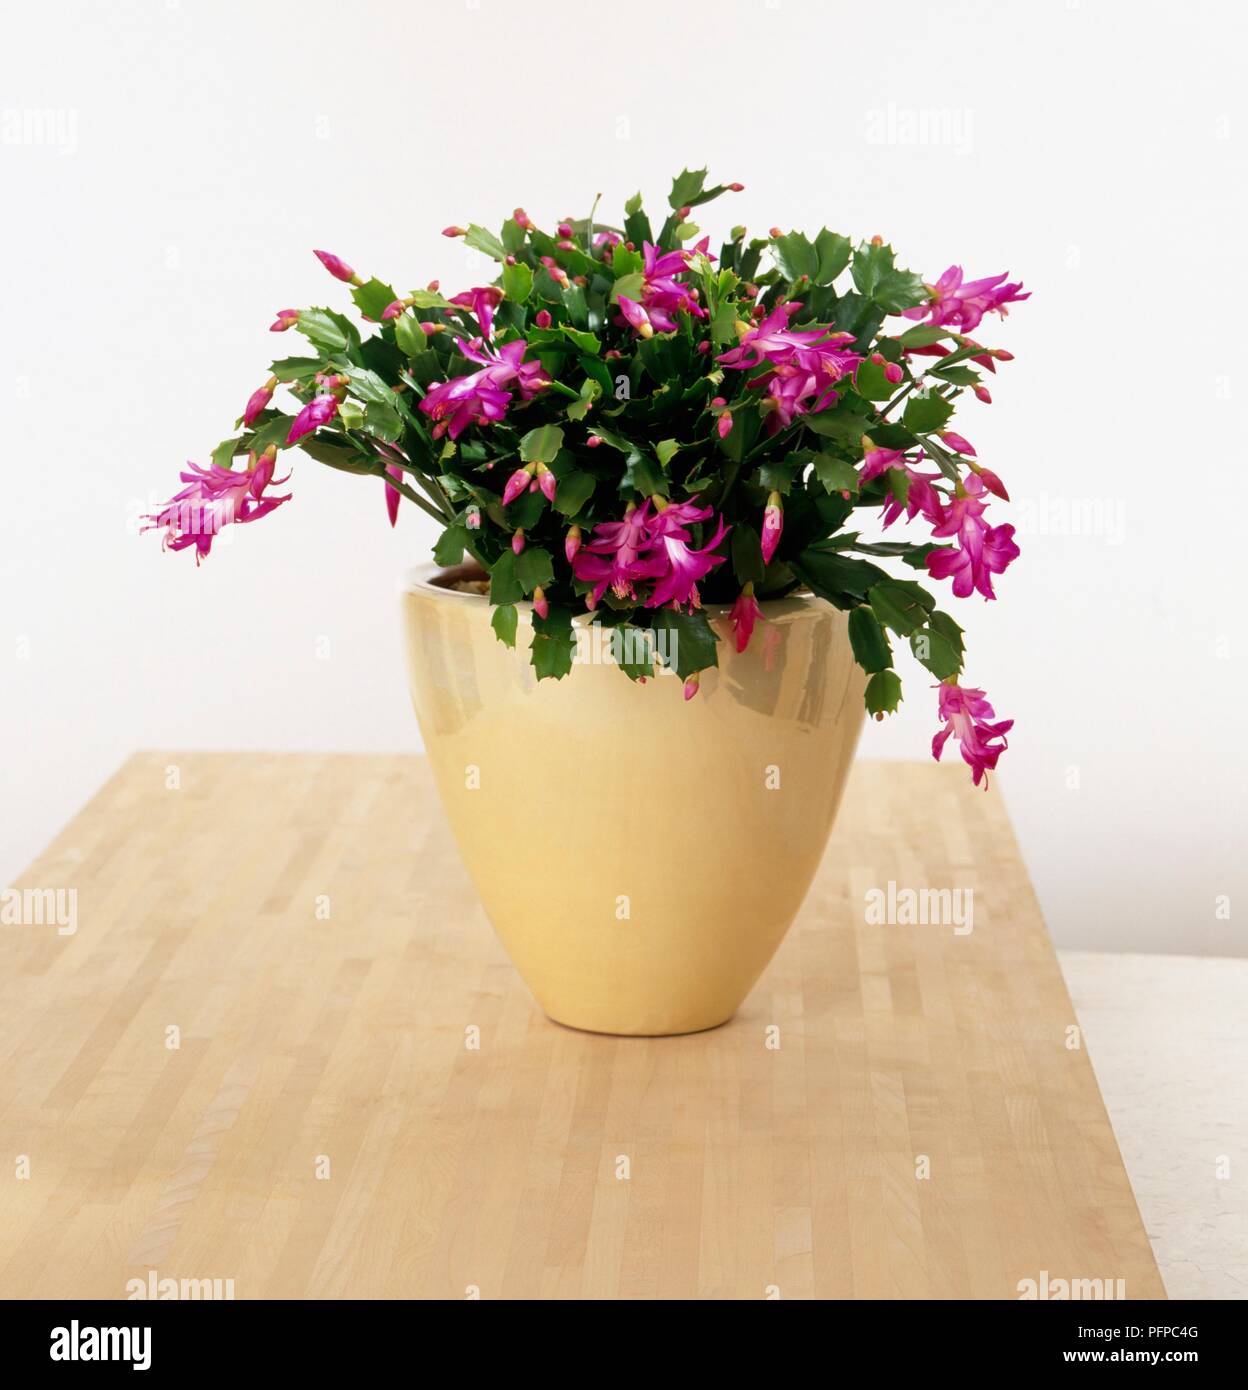 Schlumbergera hybrid (Christmas cactus) with magenta flowers in ceramic plant pot on wooden surface Stock Photo